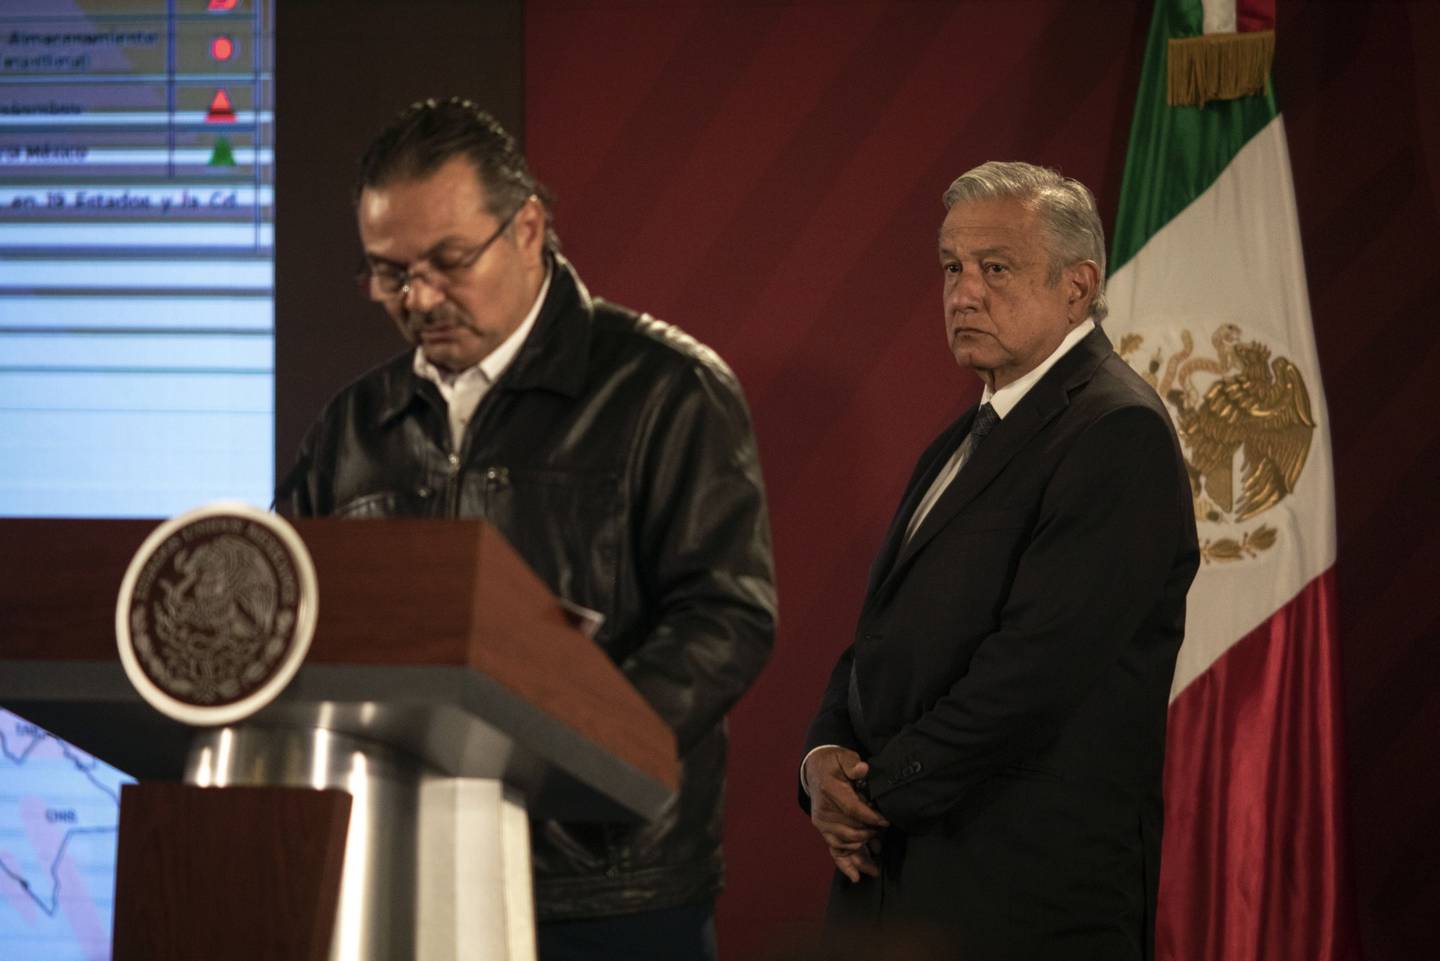 Andres Manuel Lopez Obrador, Mexico's president, listens while Octavio Romero Oropeza, chief executive officer of Petroleos Mexicanos (Pemex), left, speaks during a news conference at the National Palace in Mexico City, Mexico.